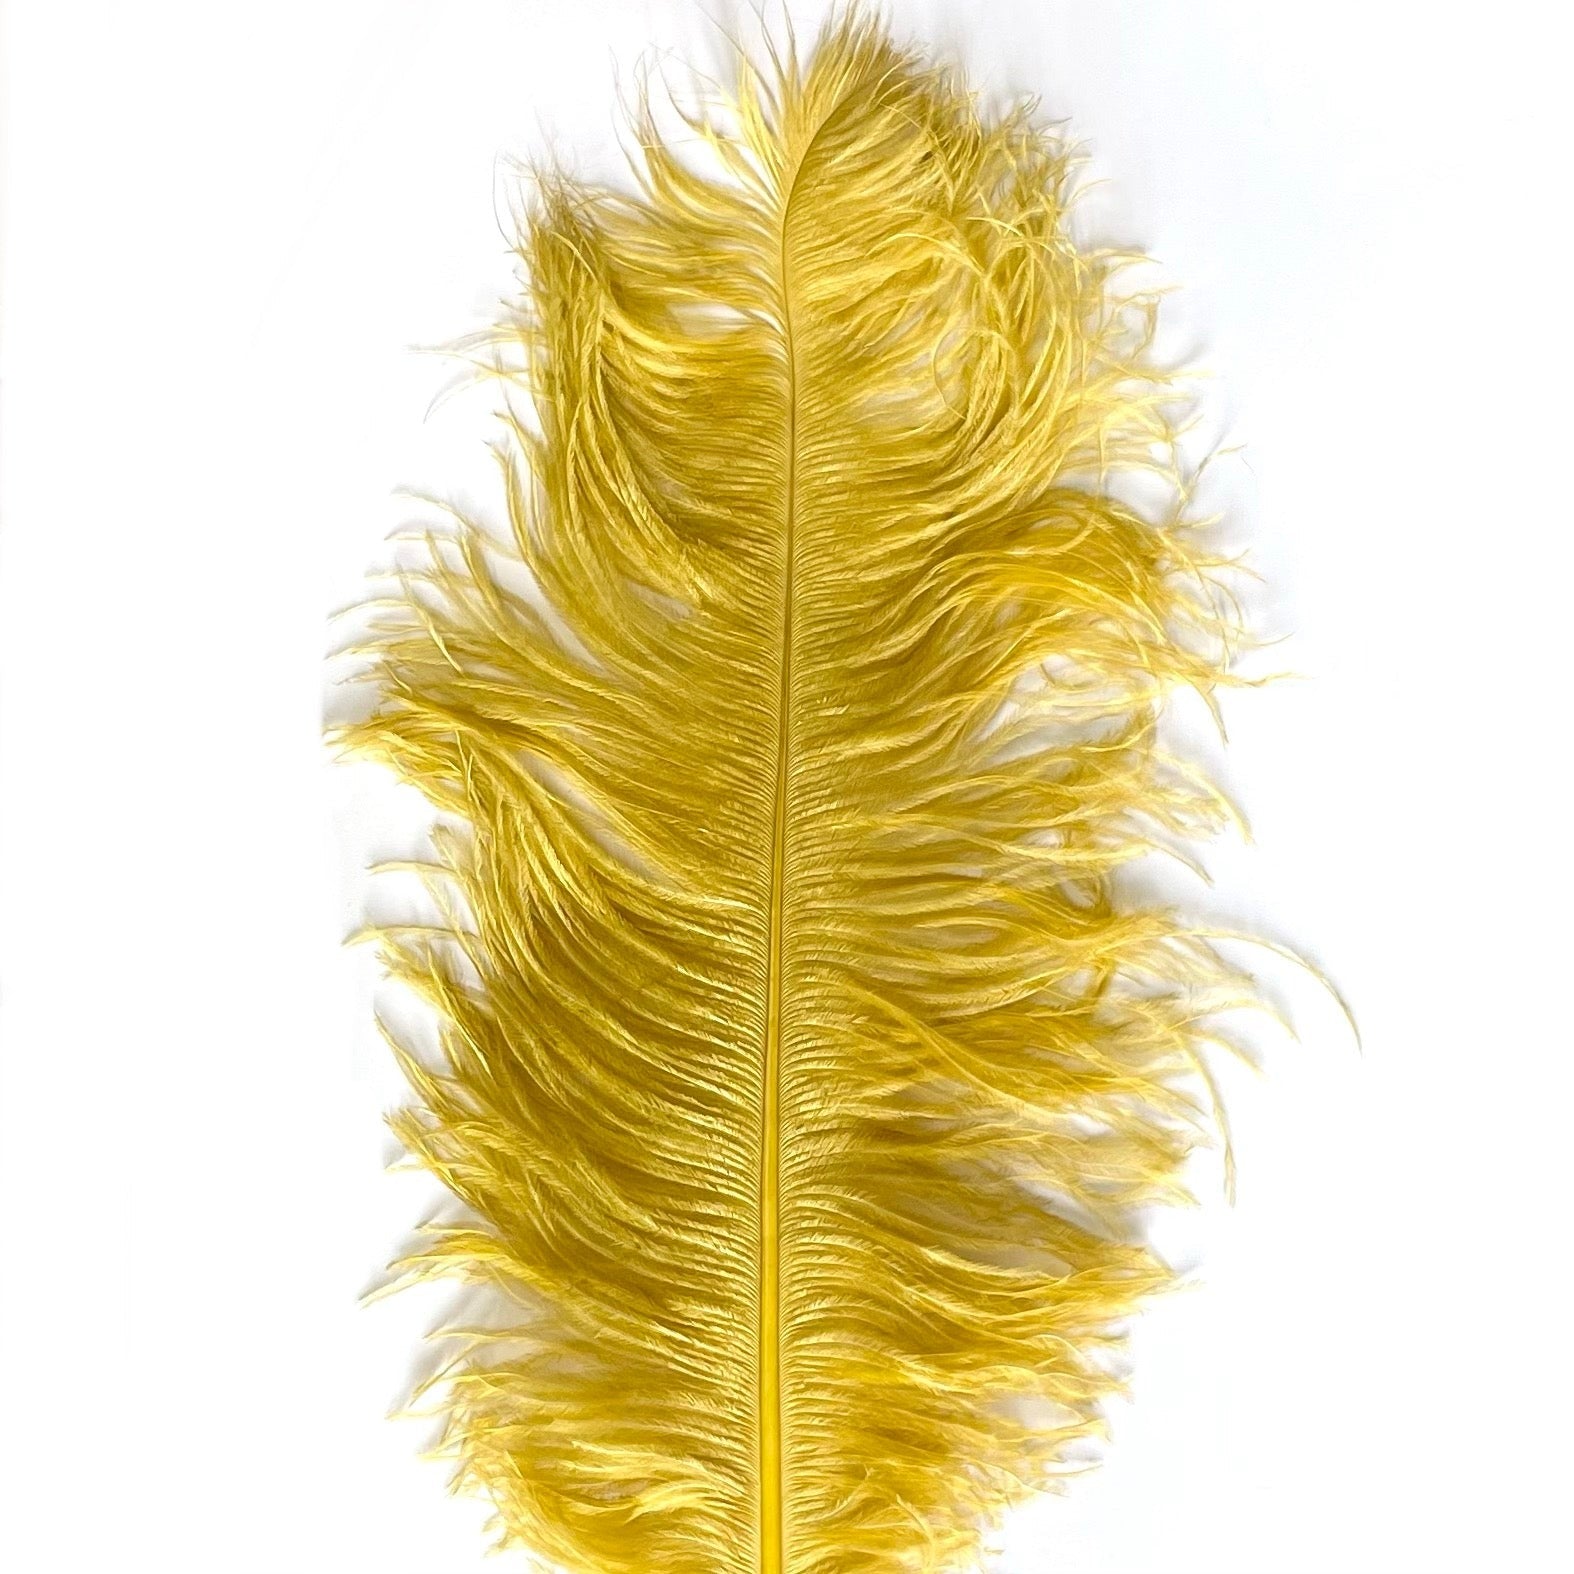 Ostrich Wing Feather Plumes 60-65cm (24-26") - Bright Gold ((SECONDS))